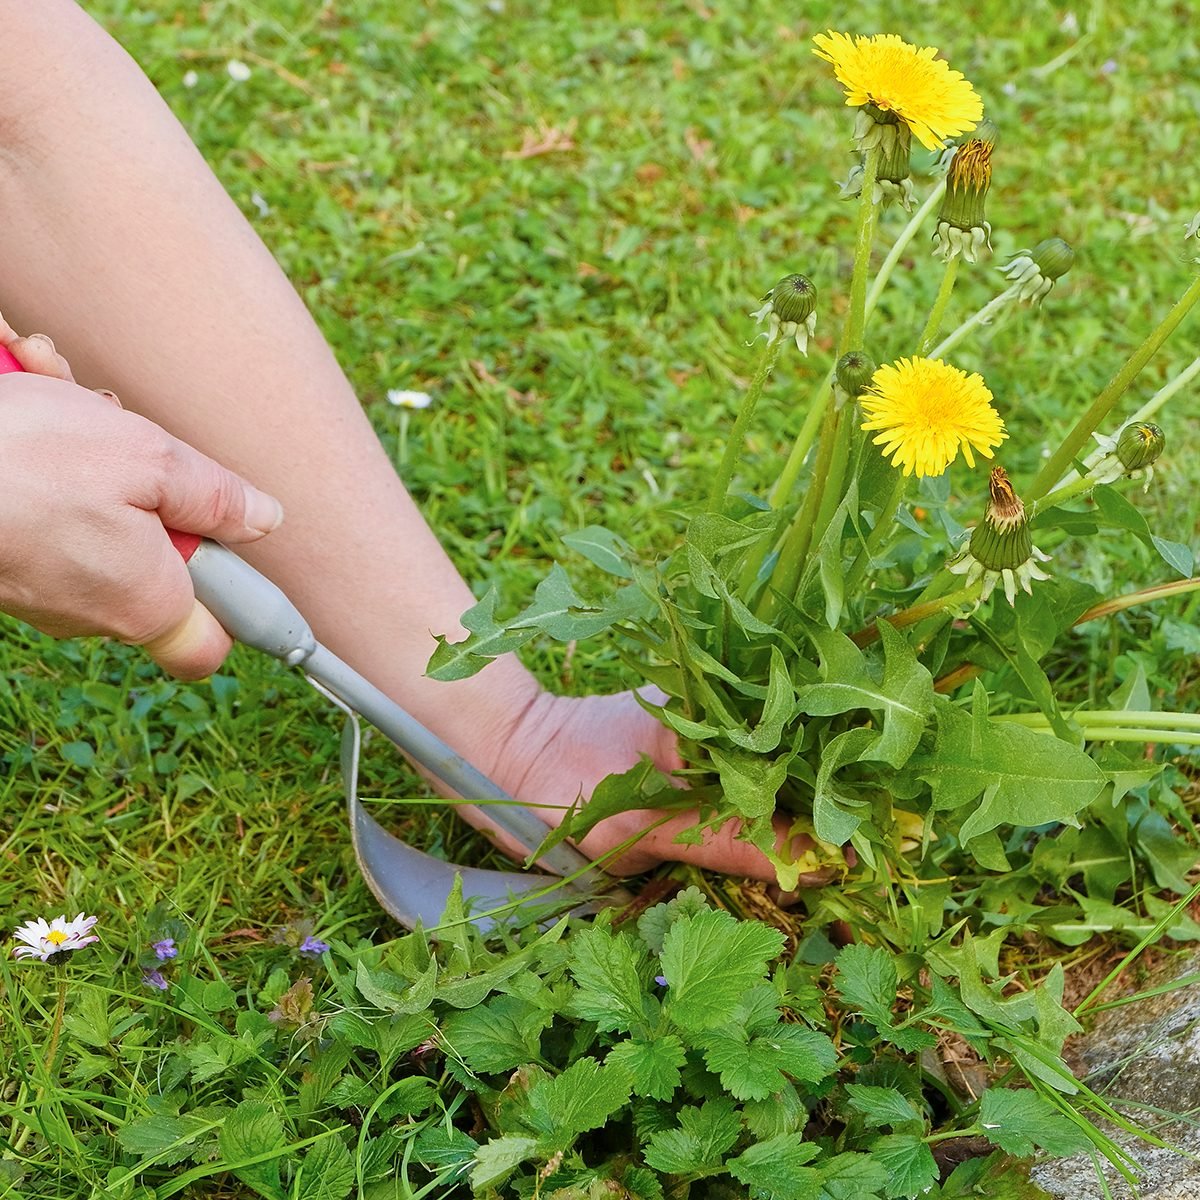 12 Most Common Weeds and How To Get Rid of Them